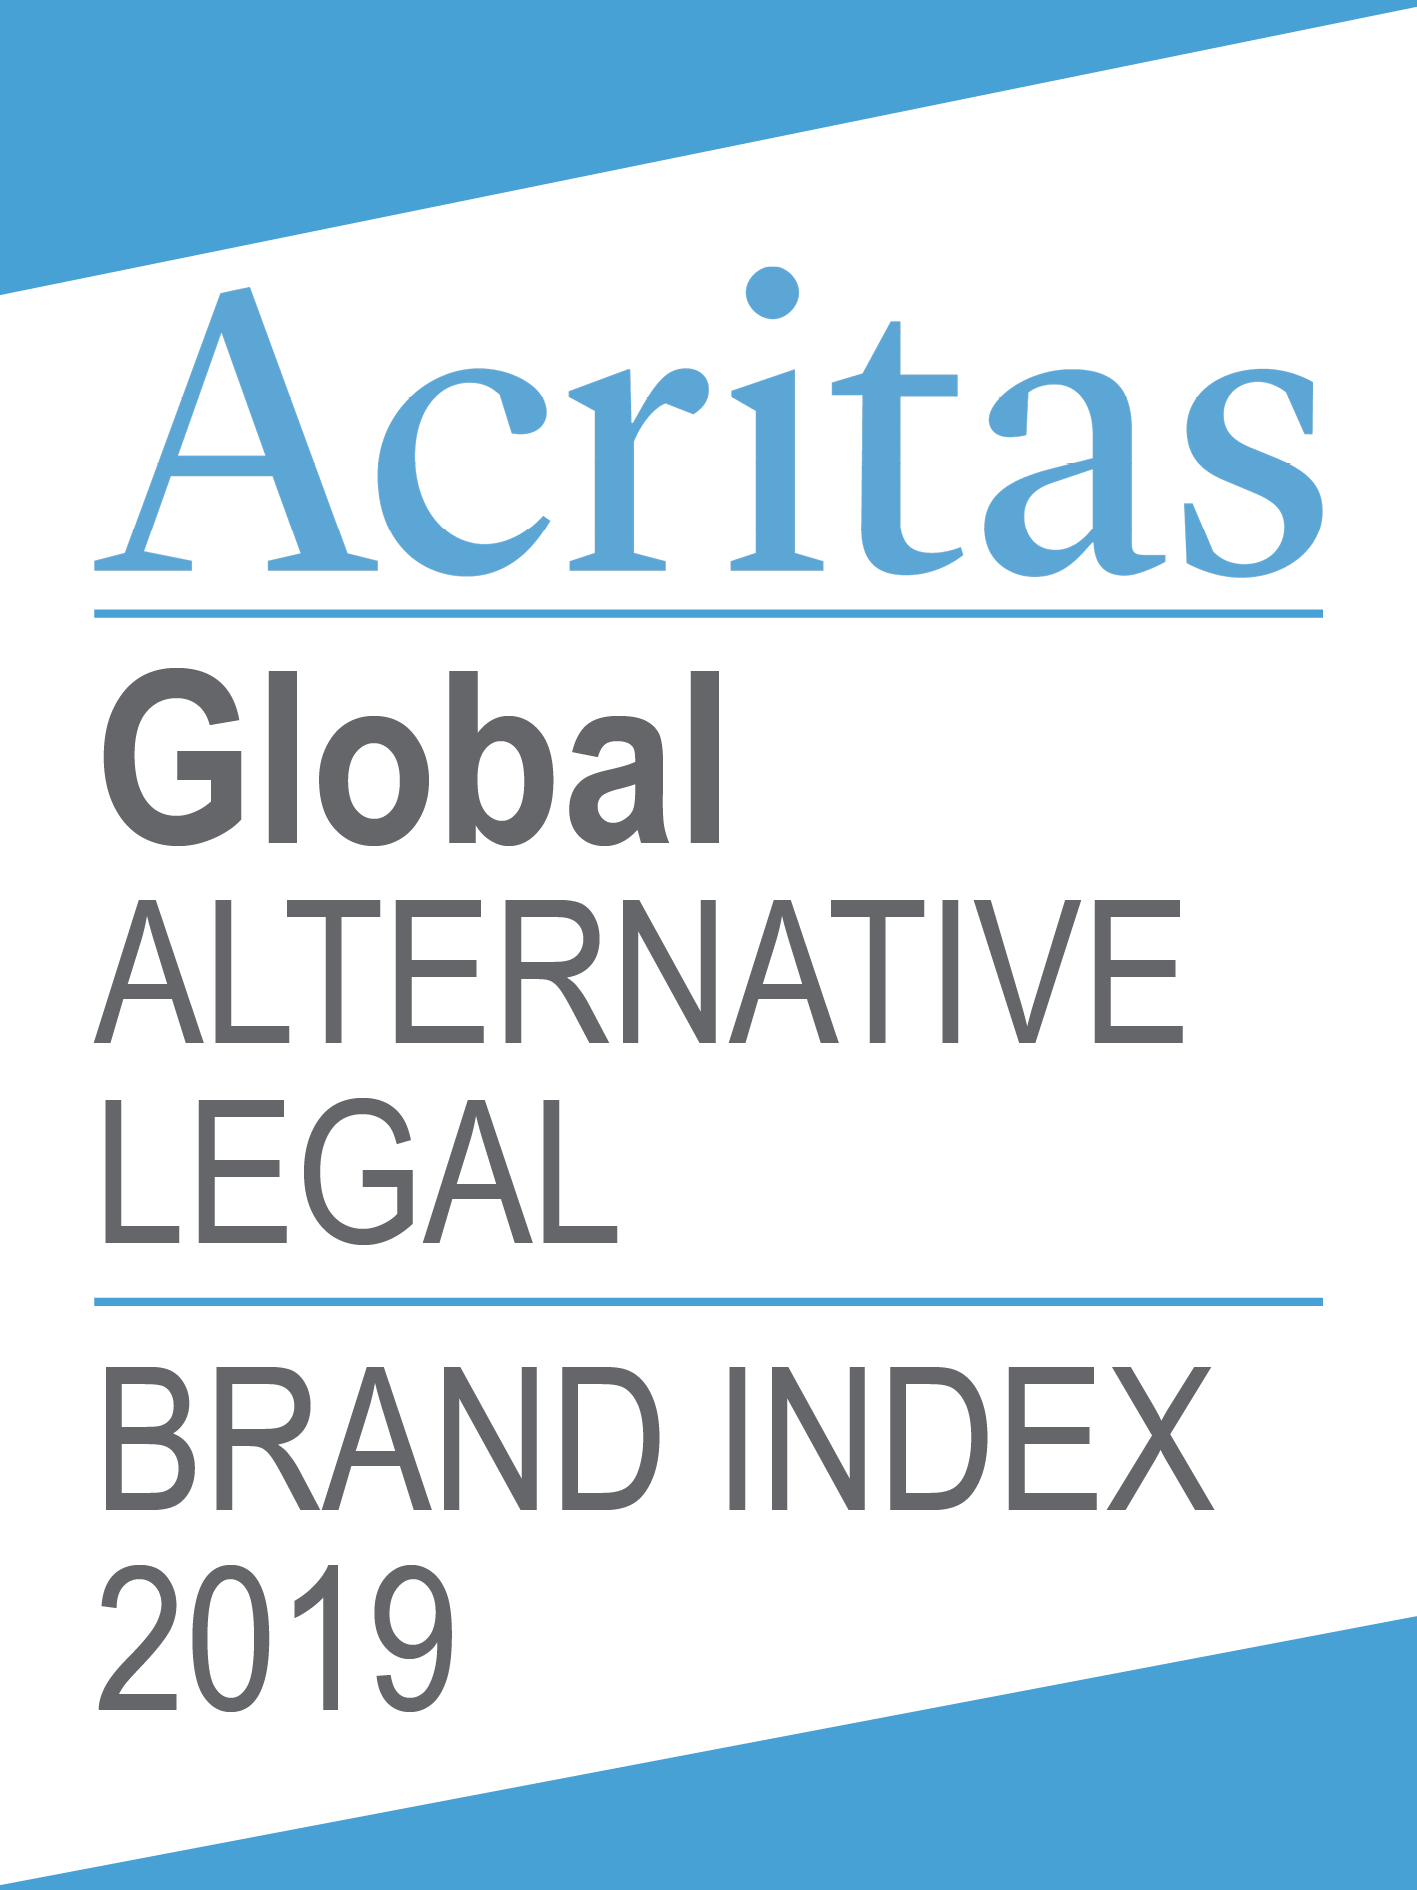 EY Law named No.1 brand in the Acritas Annual Global Alternative Legal Services Provider brand index, 2019